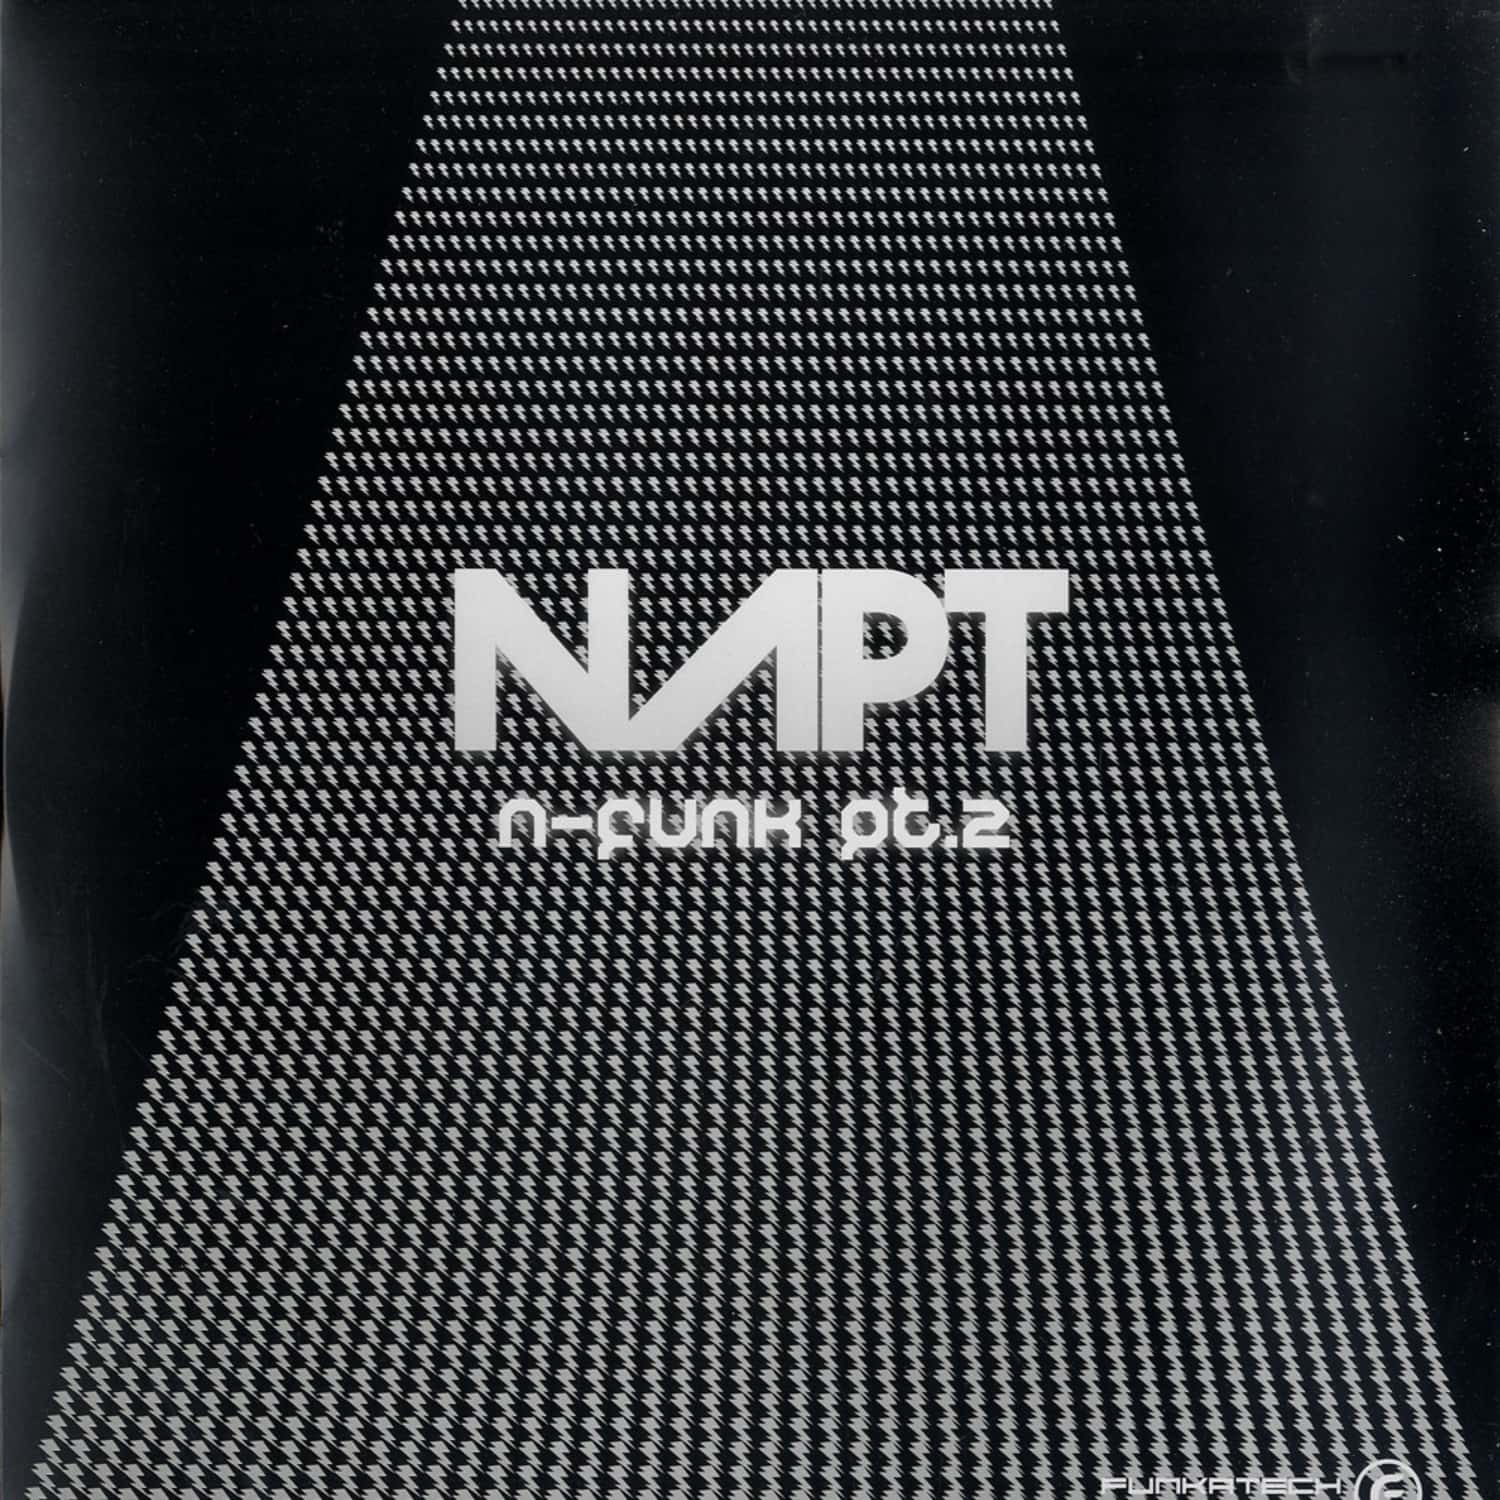 Napt - WORK THIS OUT